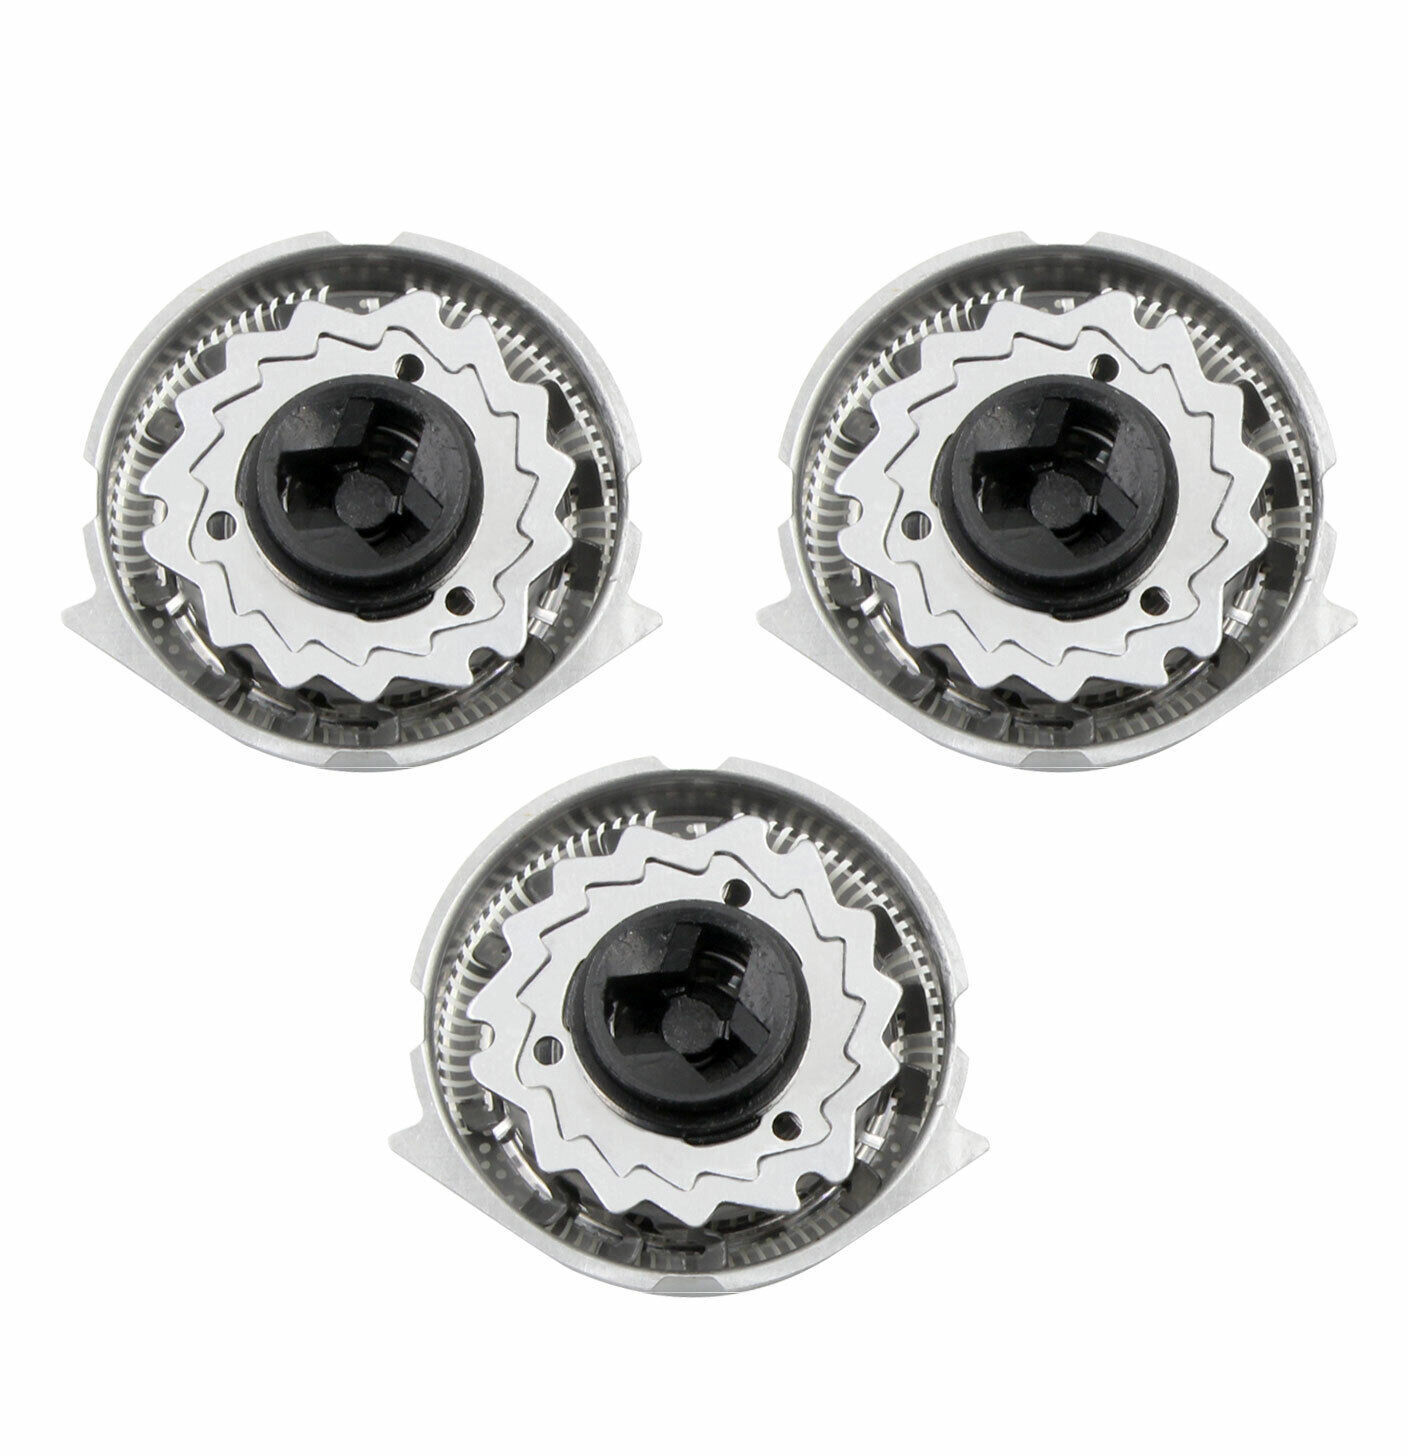 Primary image for 3Pcs Shaver Razor Heads For Philips 8138Xl 8140Xl 8150Xl 8151Xl